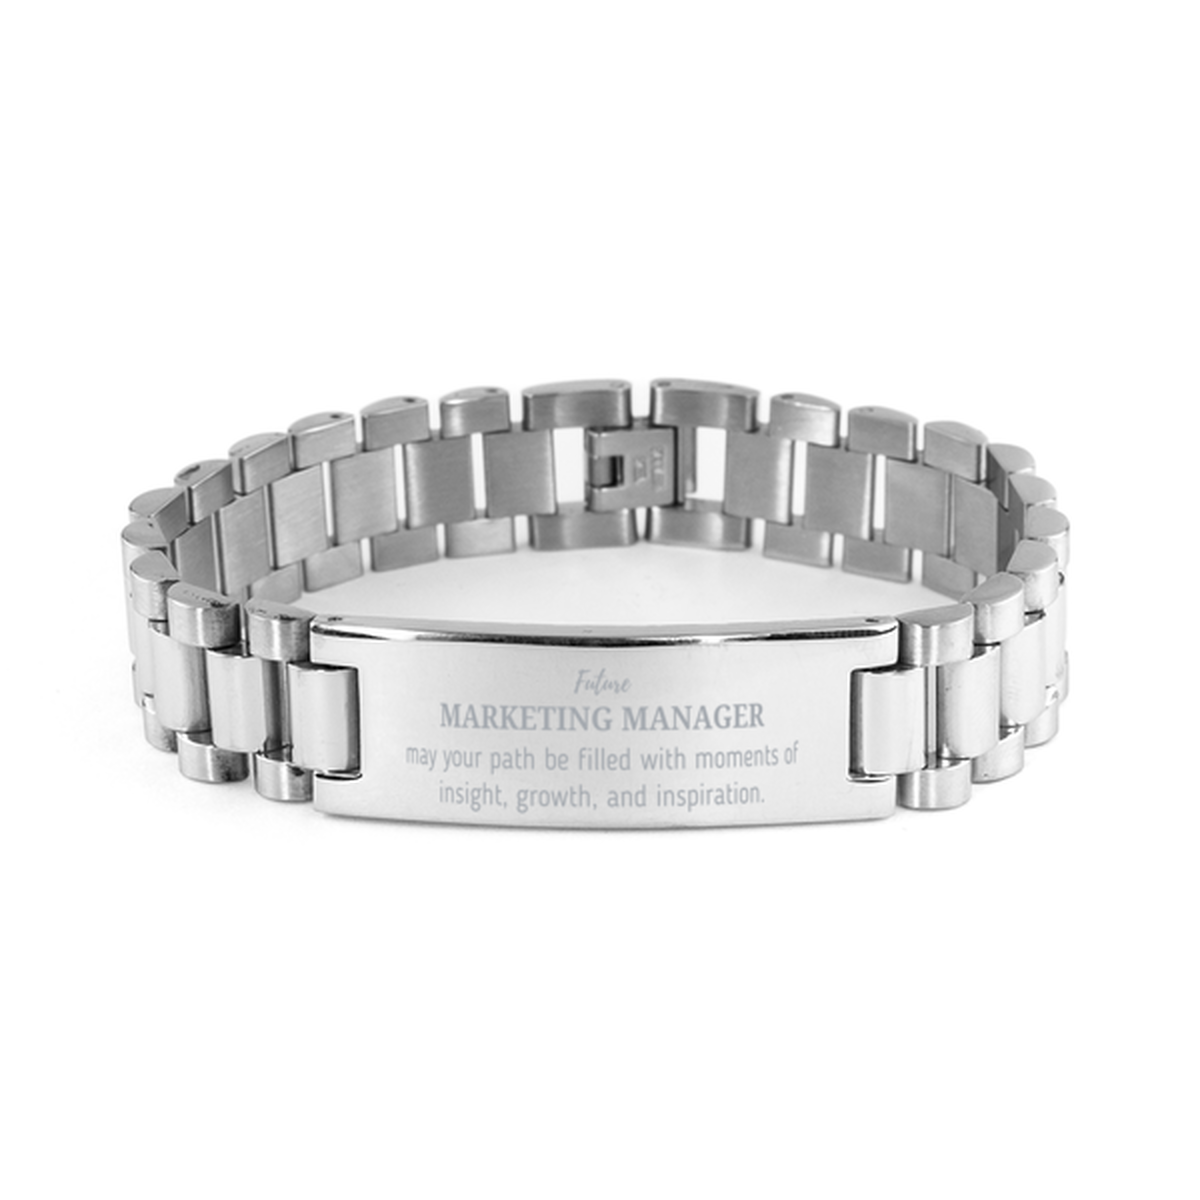 Future Marketing Manager Gifts, May your path be filled with moments of insight, Graduation Gifts for New Marketing Manager, Christmas Unique Ladder Stainless Steel Bracelet For Men, Women, Friends